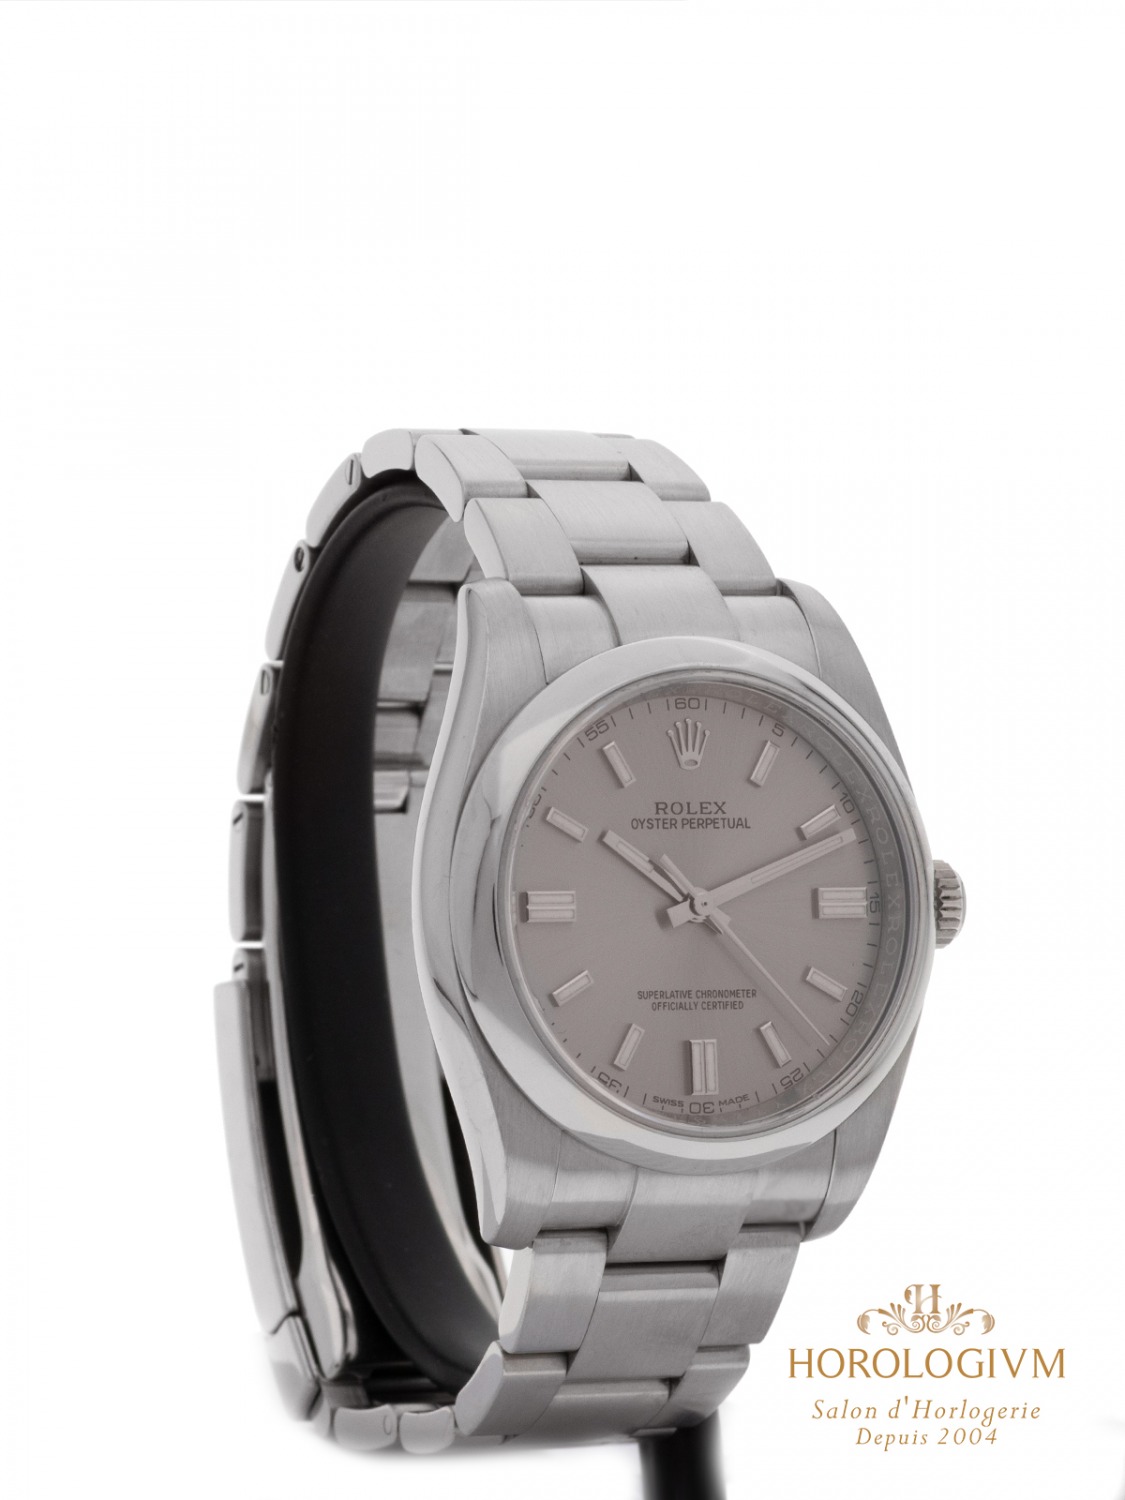 Rolex Oyster Perpetual 36 MM Ref. 116000 watch, silver